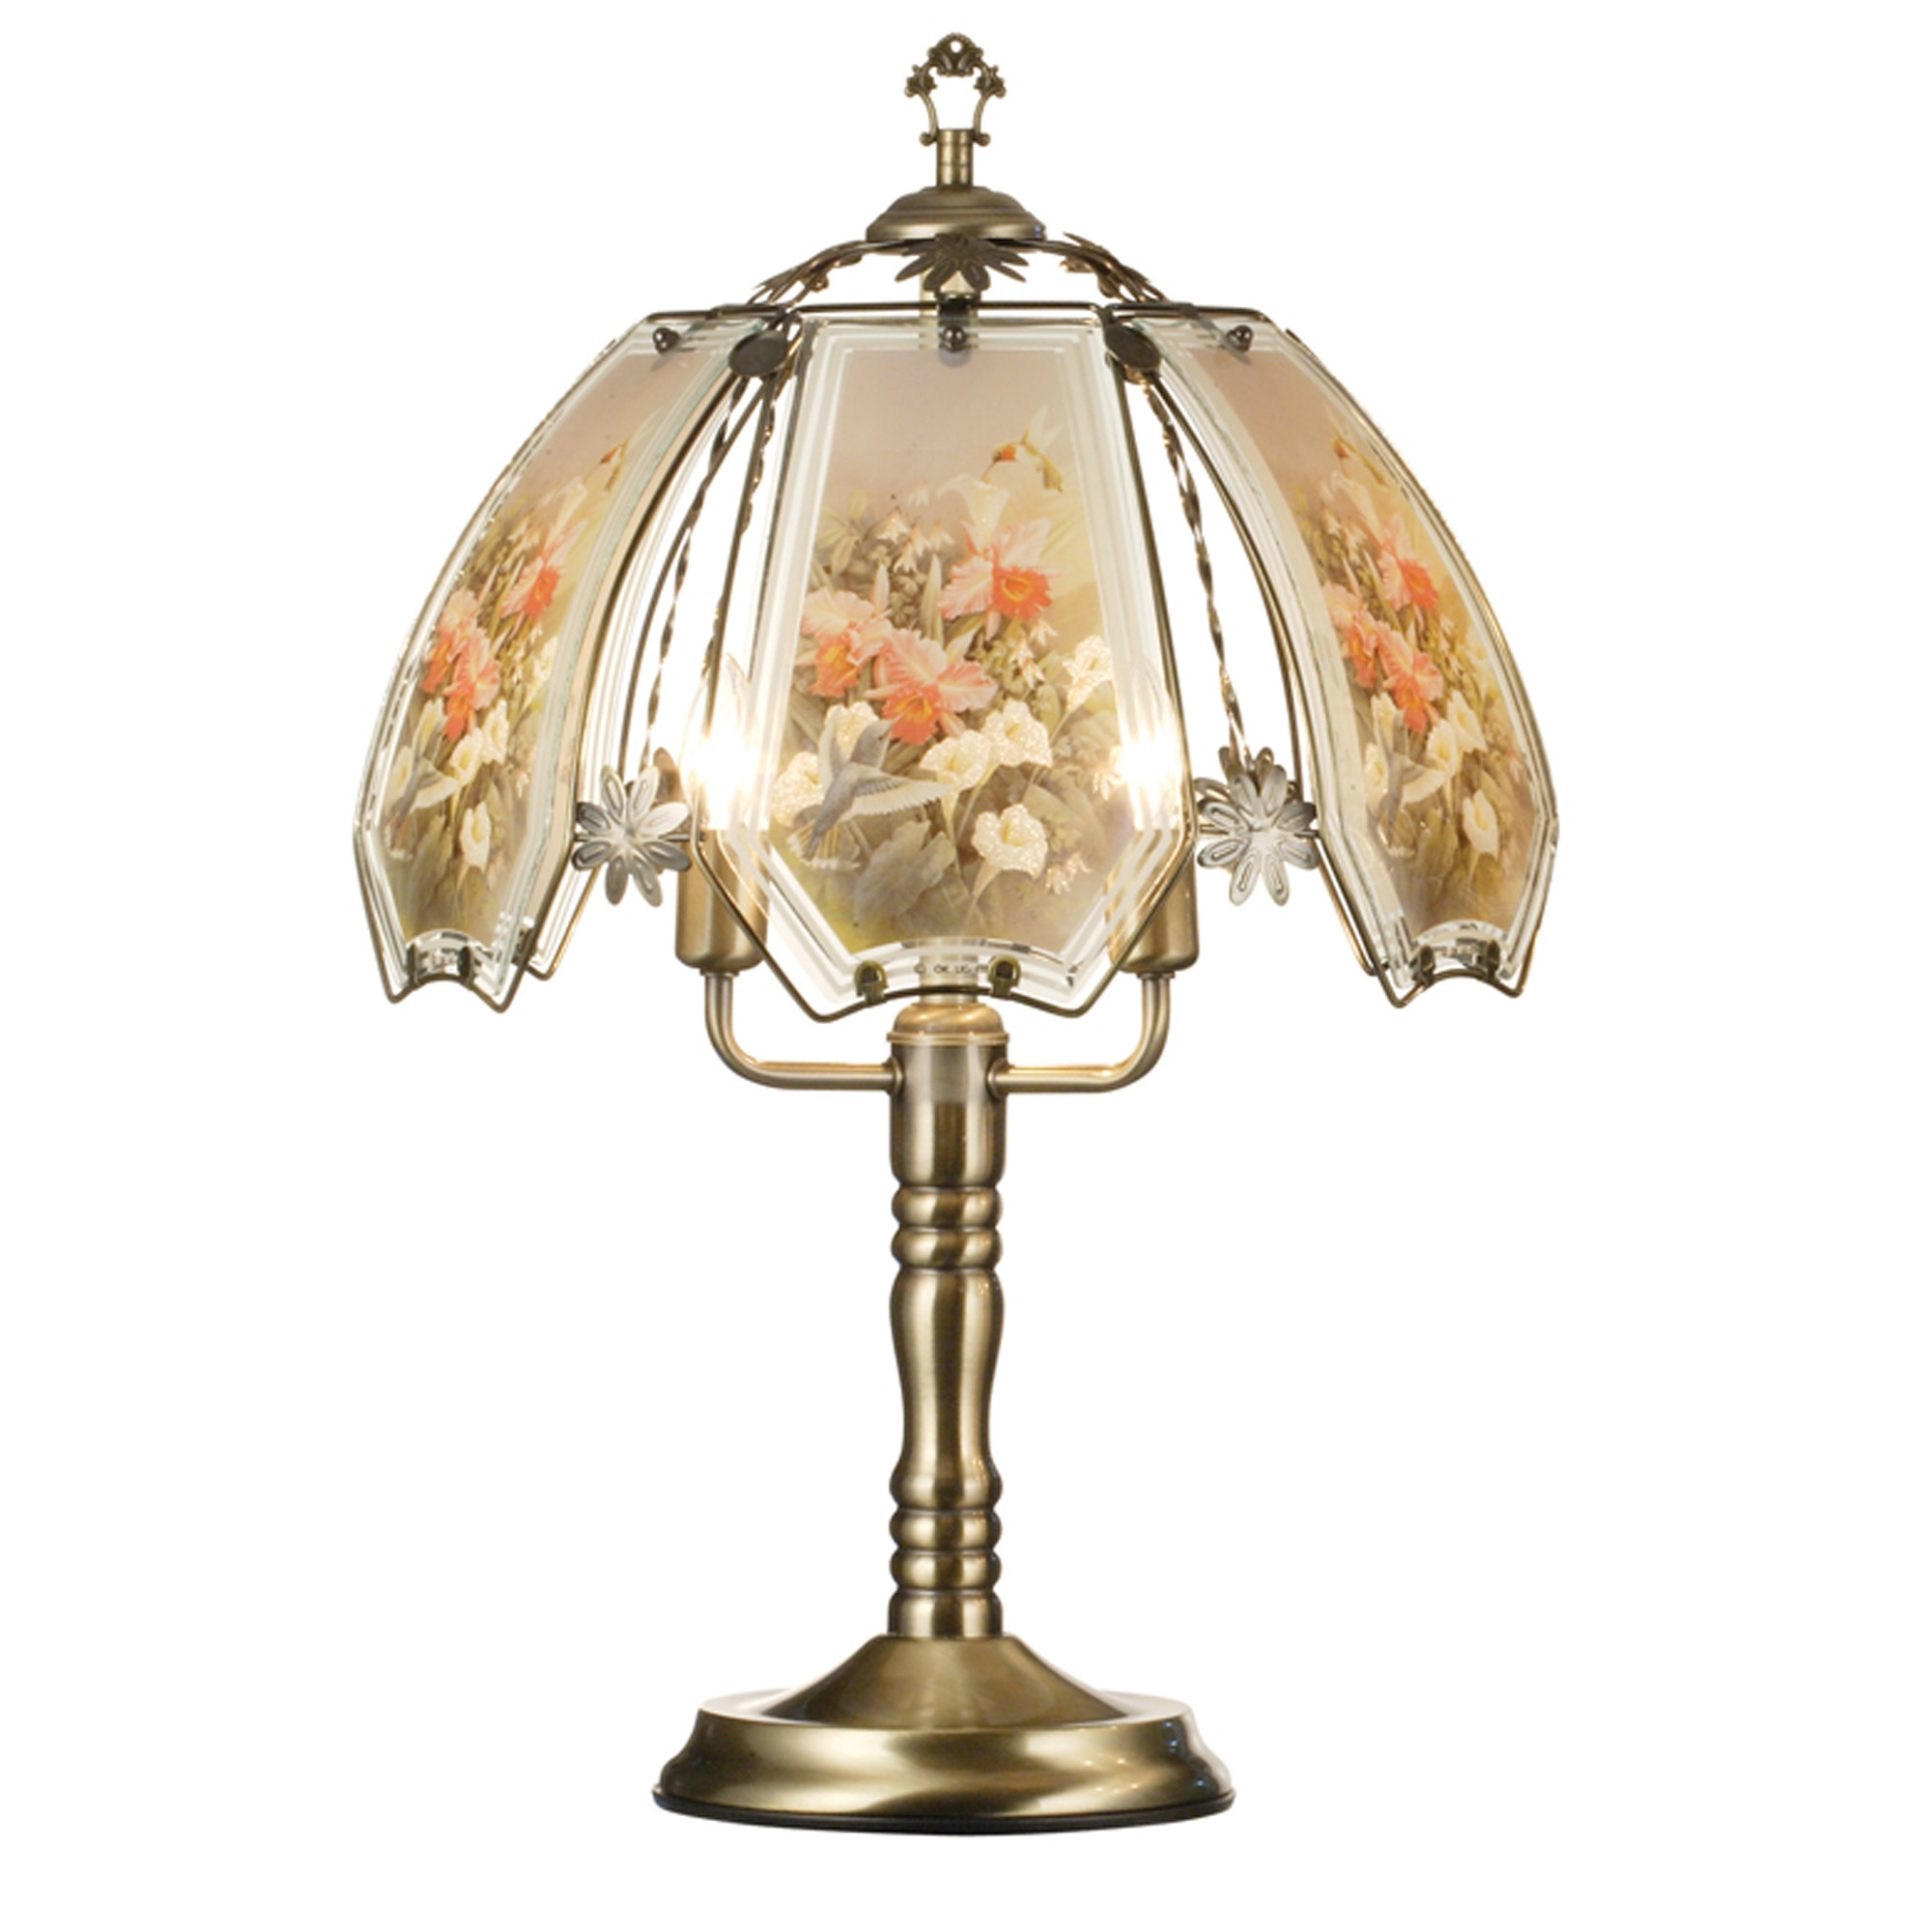 Humming Bird Scene Touch 23.5" H Table Lamp with Bowl Shade